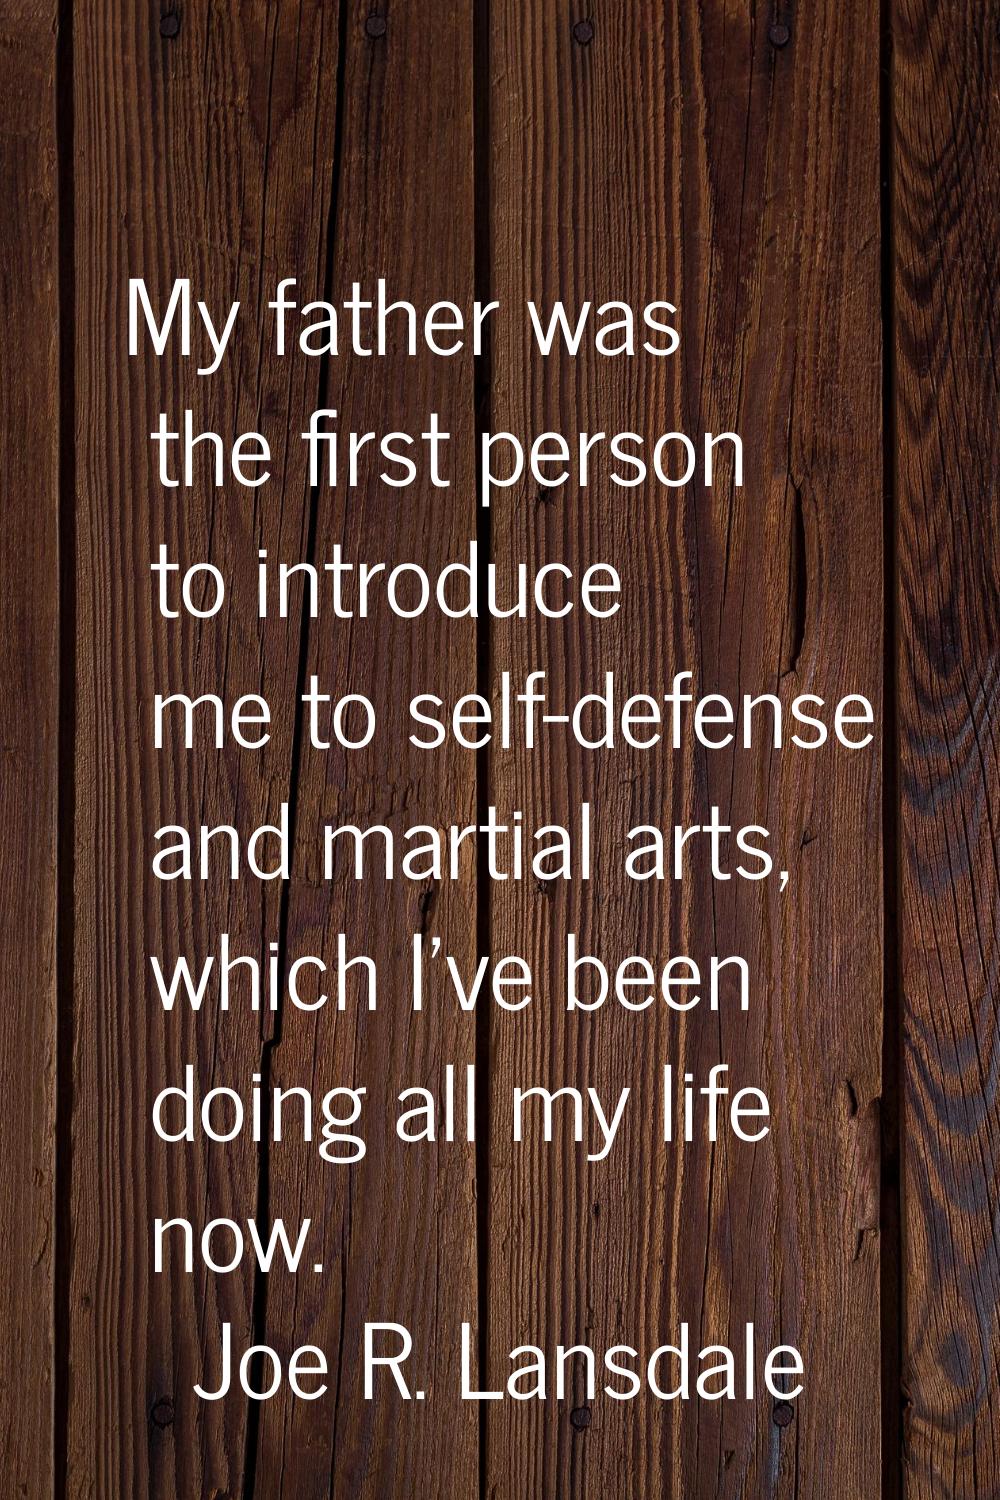 My father was the first person to introduce me to self-defense and martial arts, which I've been do